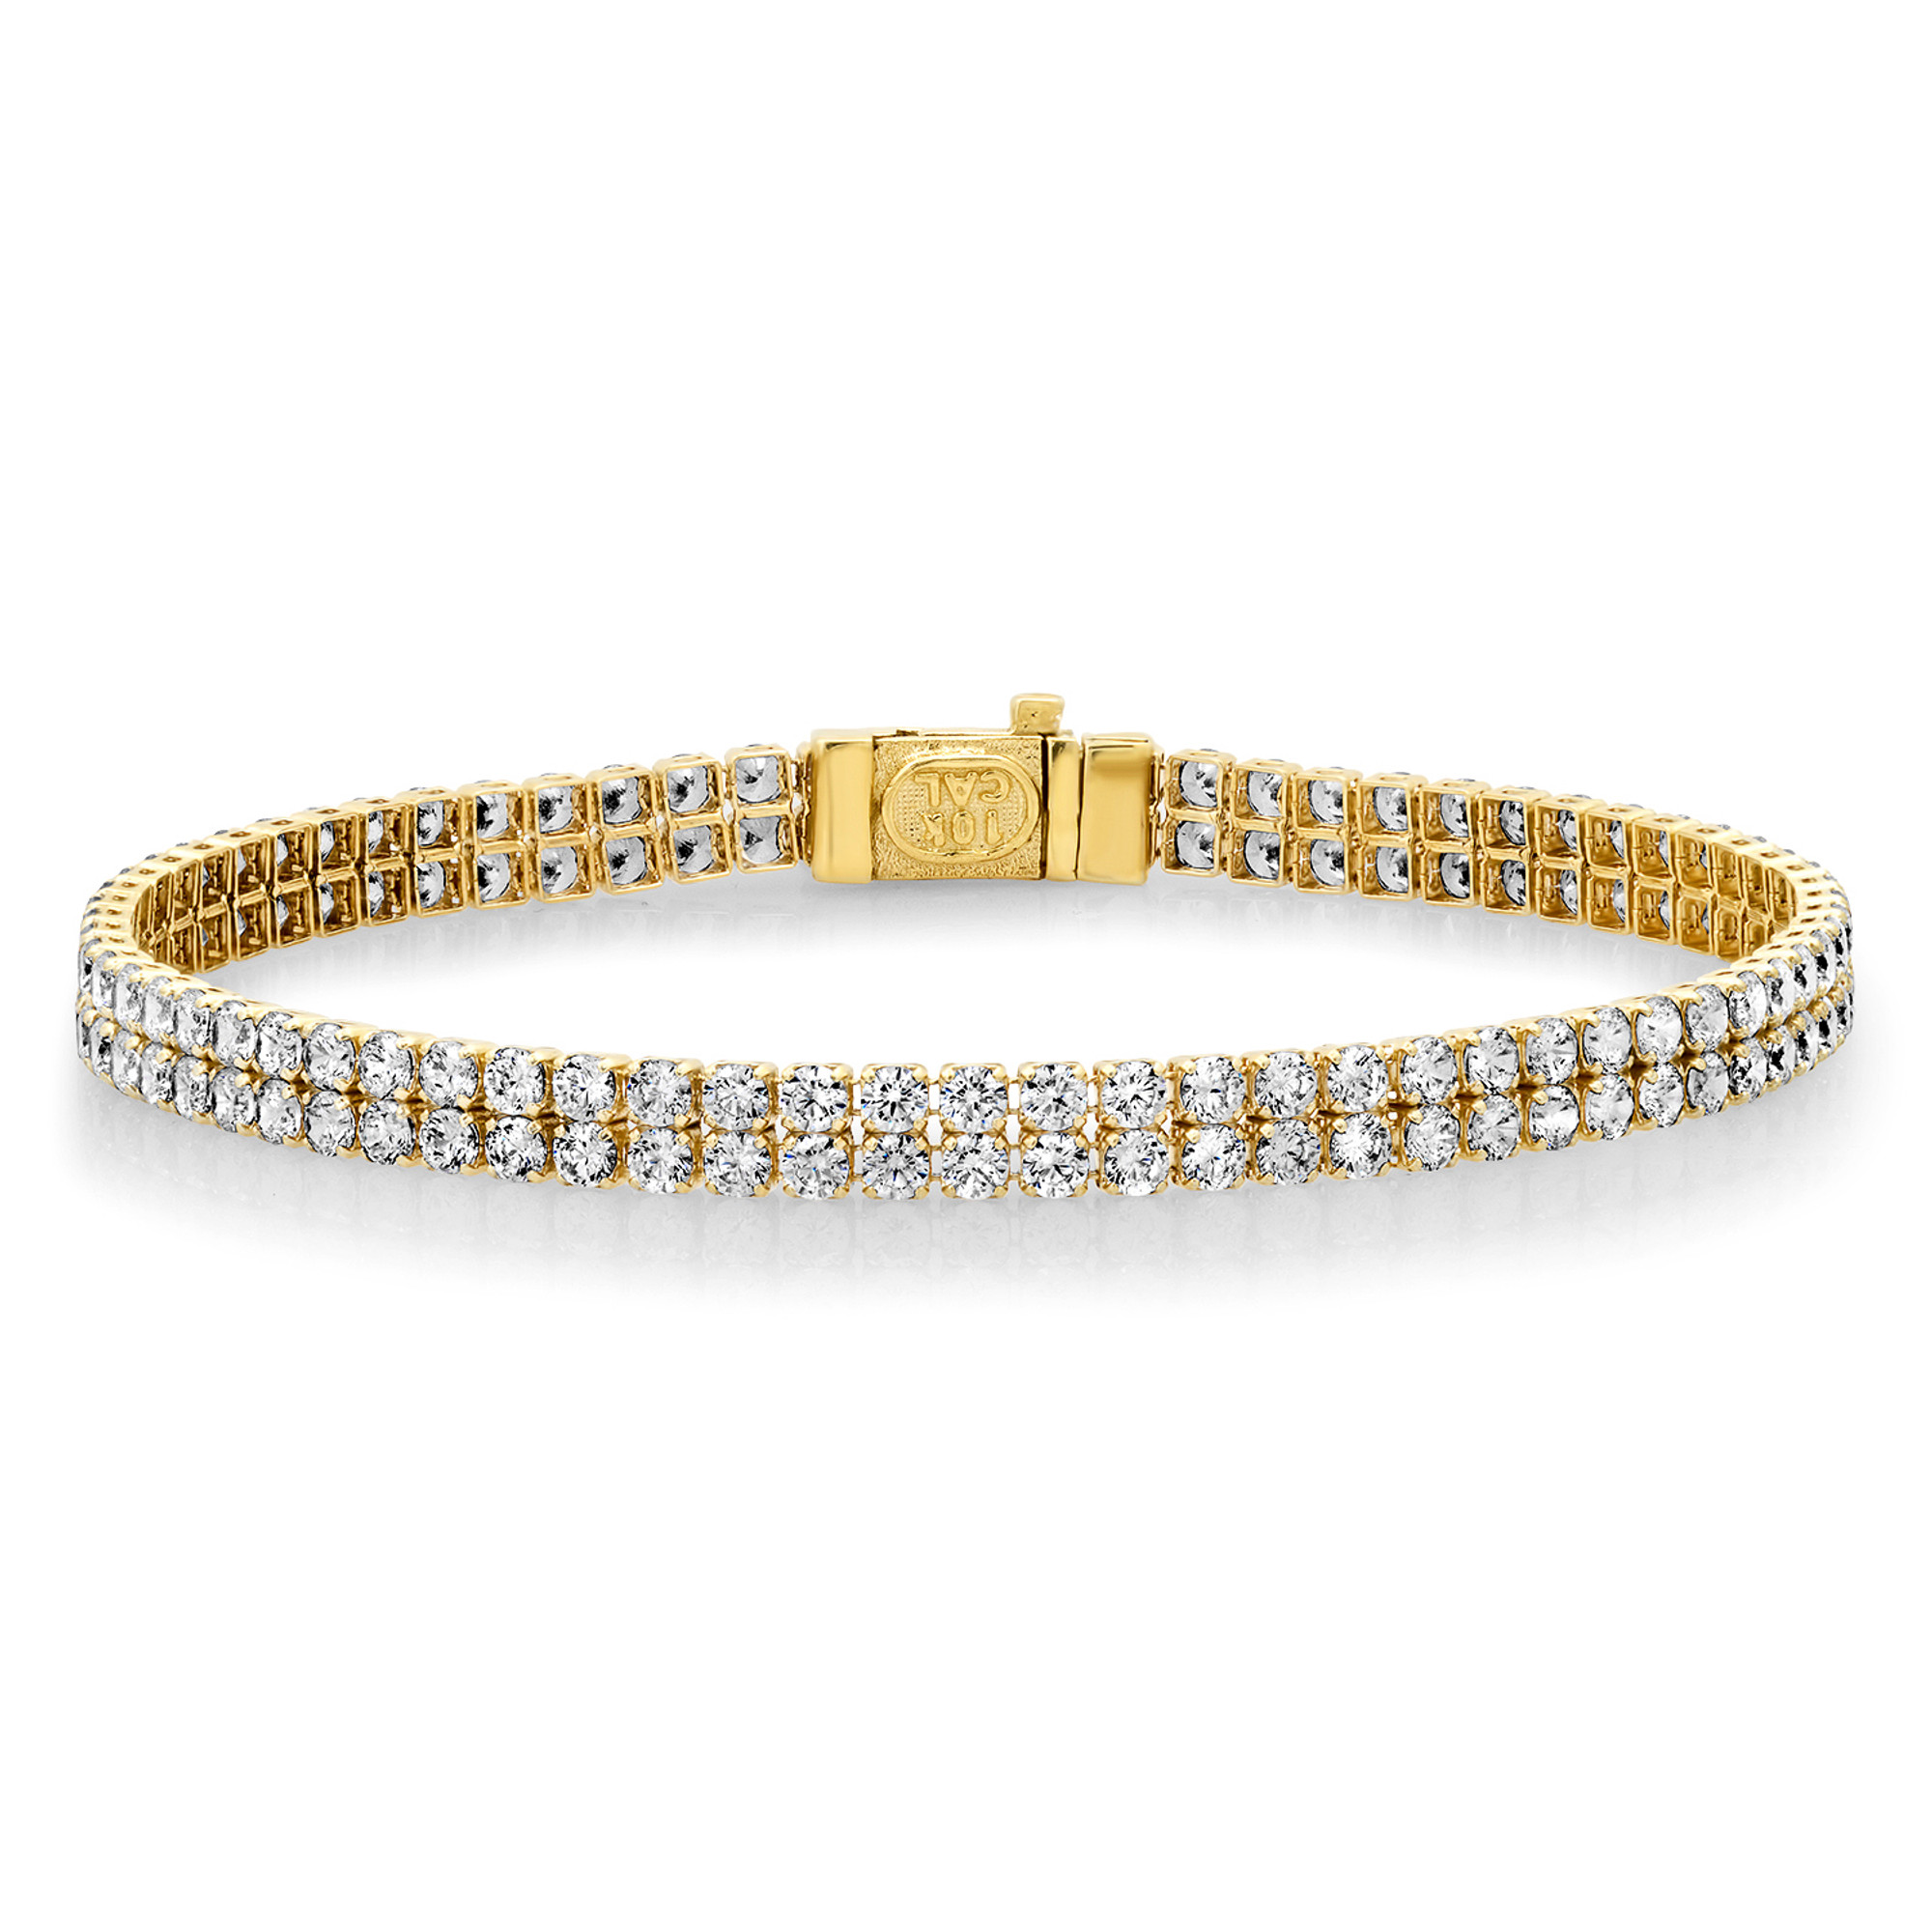 Made in Italy 4.2mm Double Rope Chain Bracelet in 14K Gold - 7.5